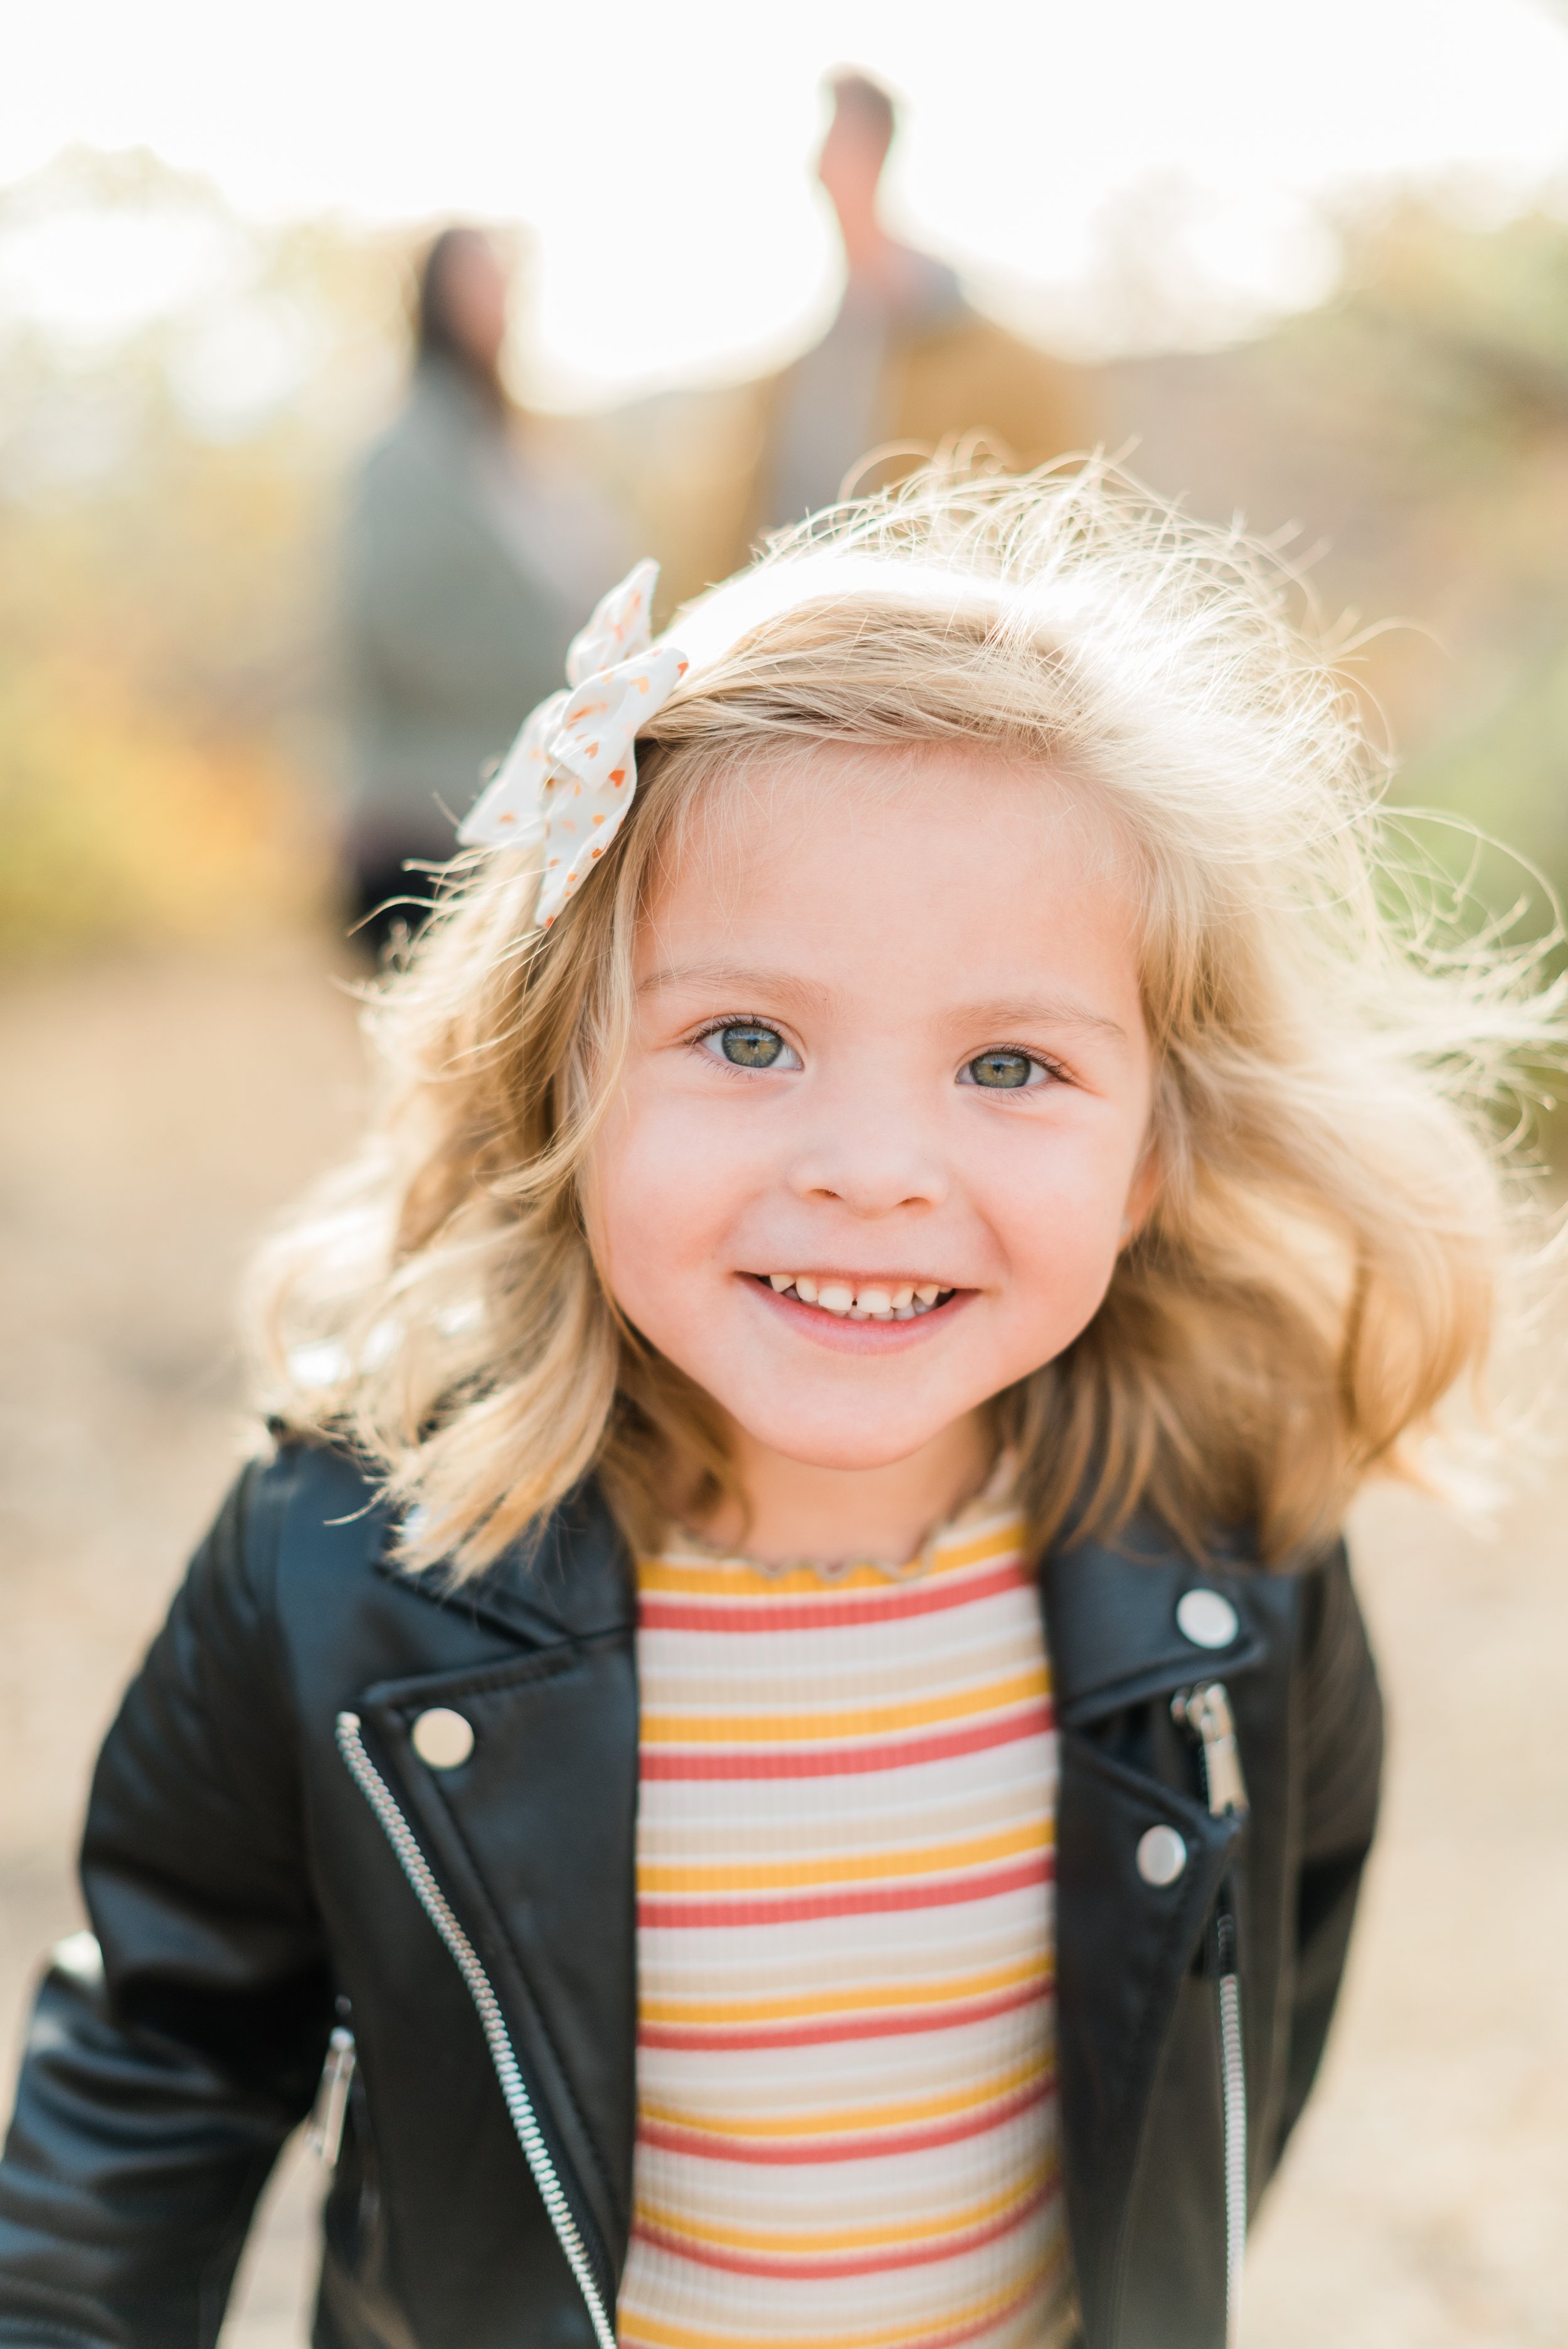  A little girl smiles for the camera with her parents blurred in the background. Jacquie Erickson Photography email templates know your clients photo timeline updates&nbsp; #postphotoshoottips #GeorgiaFamilyPhotographer #photographertips #peachtreeGA